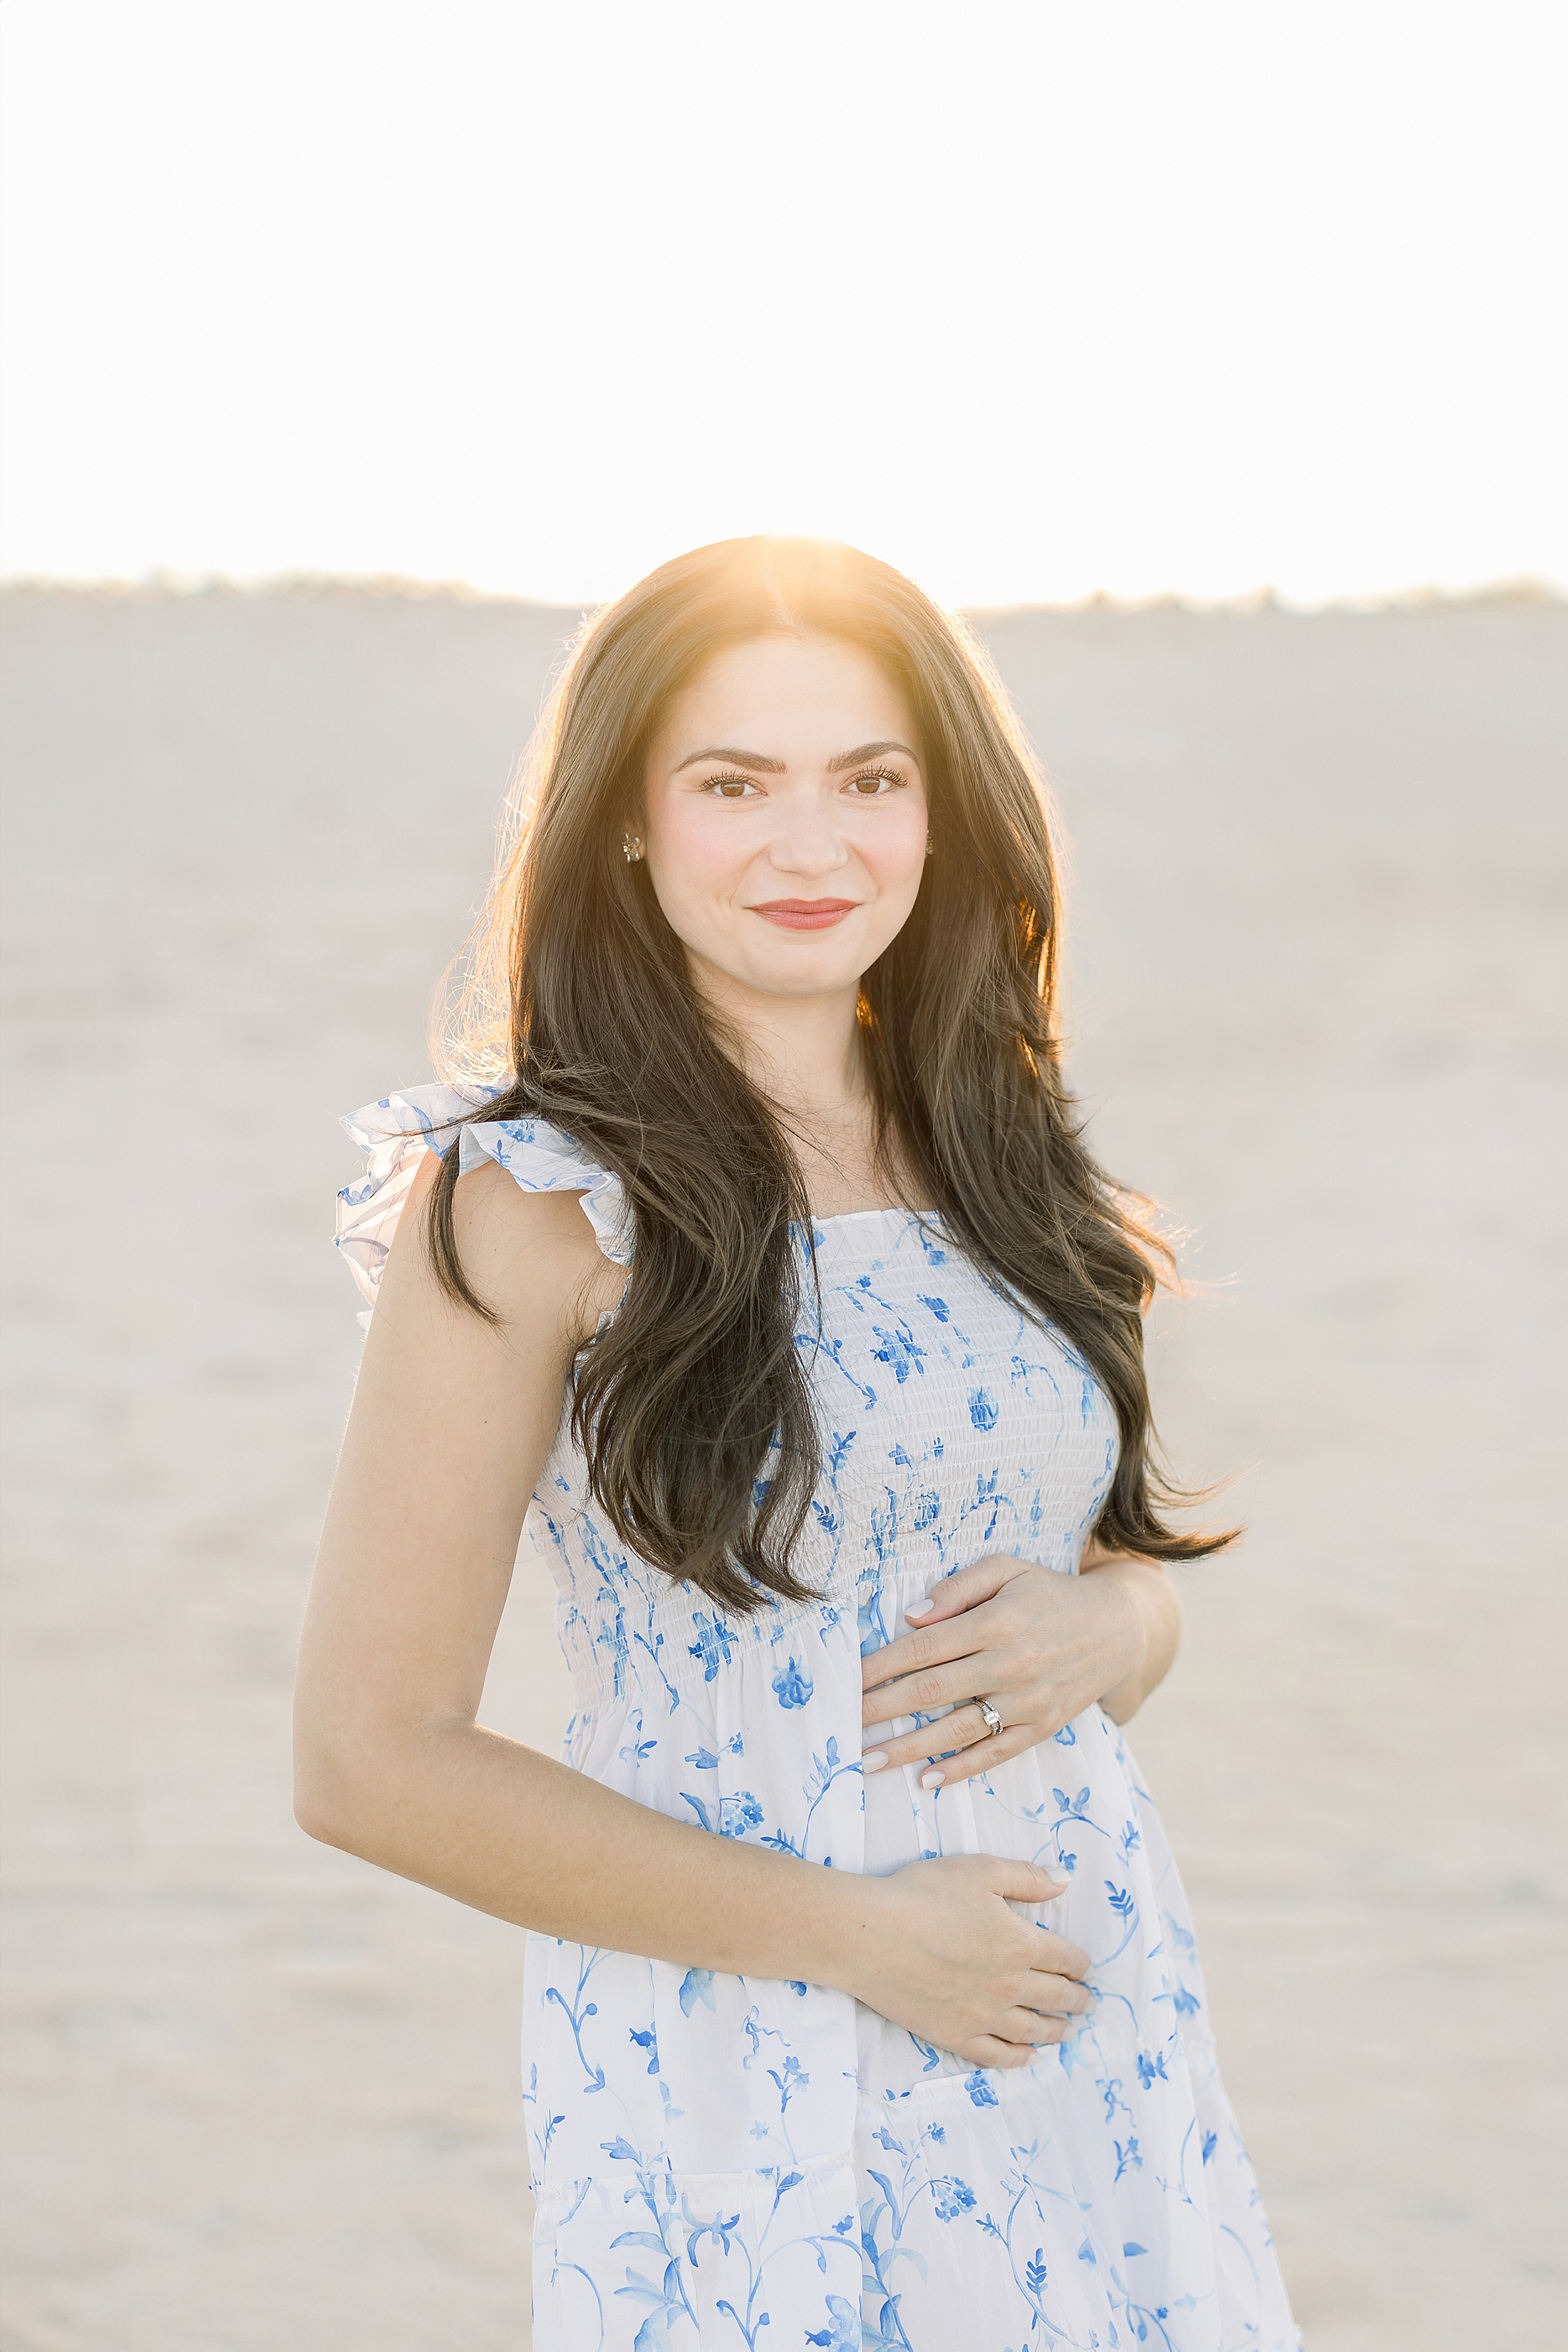 A pregnancy announcement portrait of a woman in a blue and white dress on the beach at sunset.